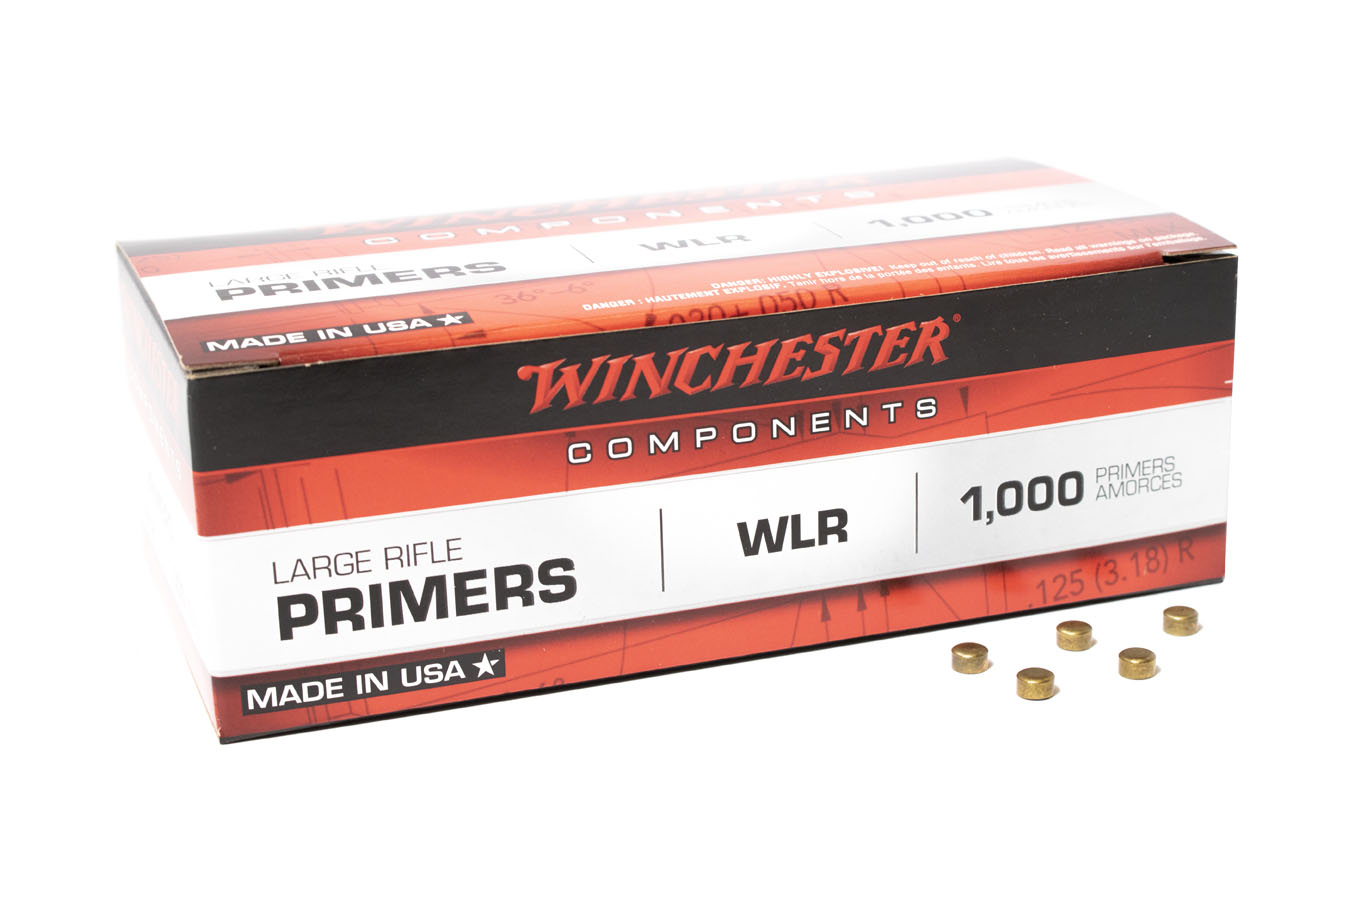 WINCHESTER AMMO LARGE RIFLE PRIMERS 1000/BOX